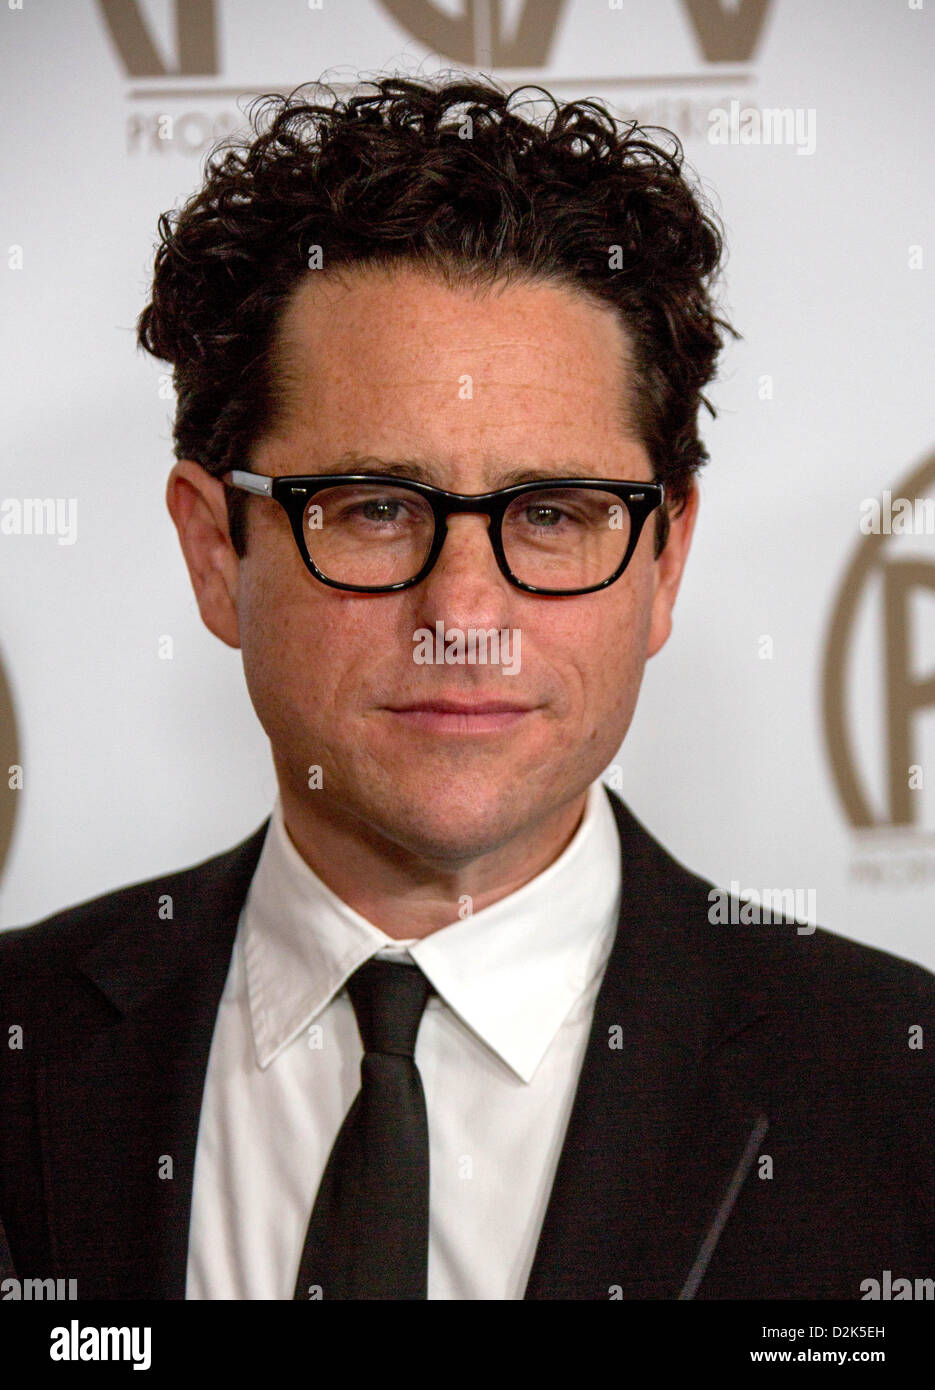 US director J.J. Abrams arrives at the 24th annual Producers Guild Awards at Hotel Beverly Hills in Beverly Hills, USA, 26 January 2013. Photo: Hubert Boesl/dpa/Alamy Live News Stock Photo